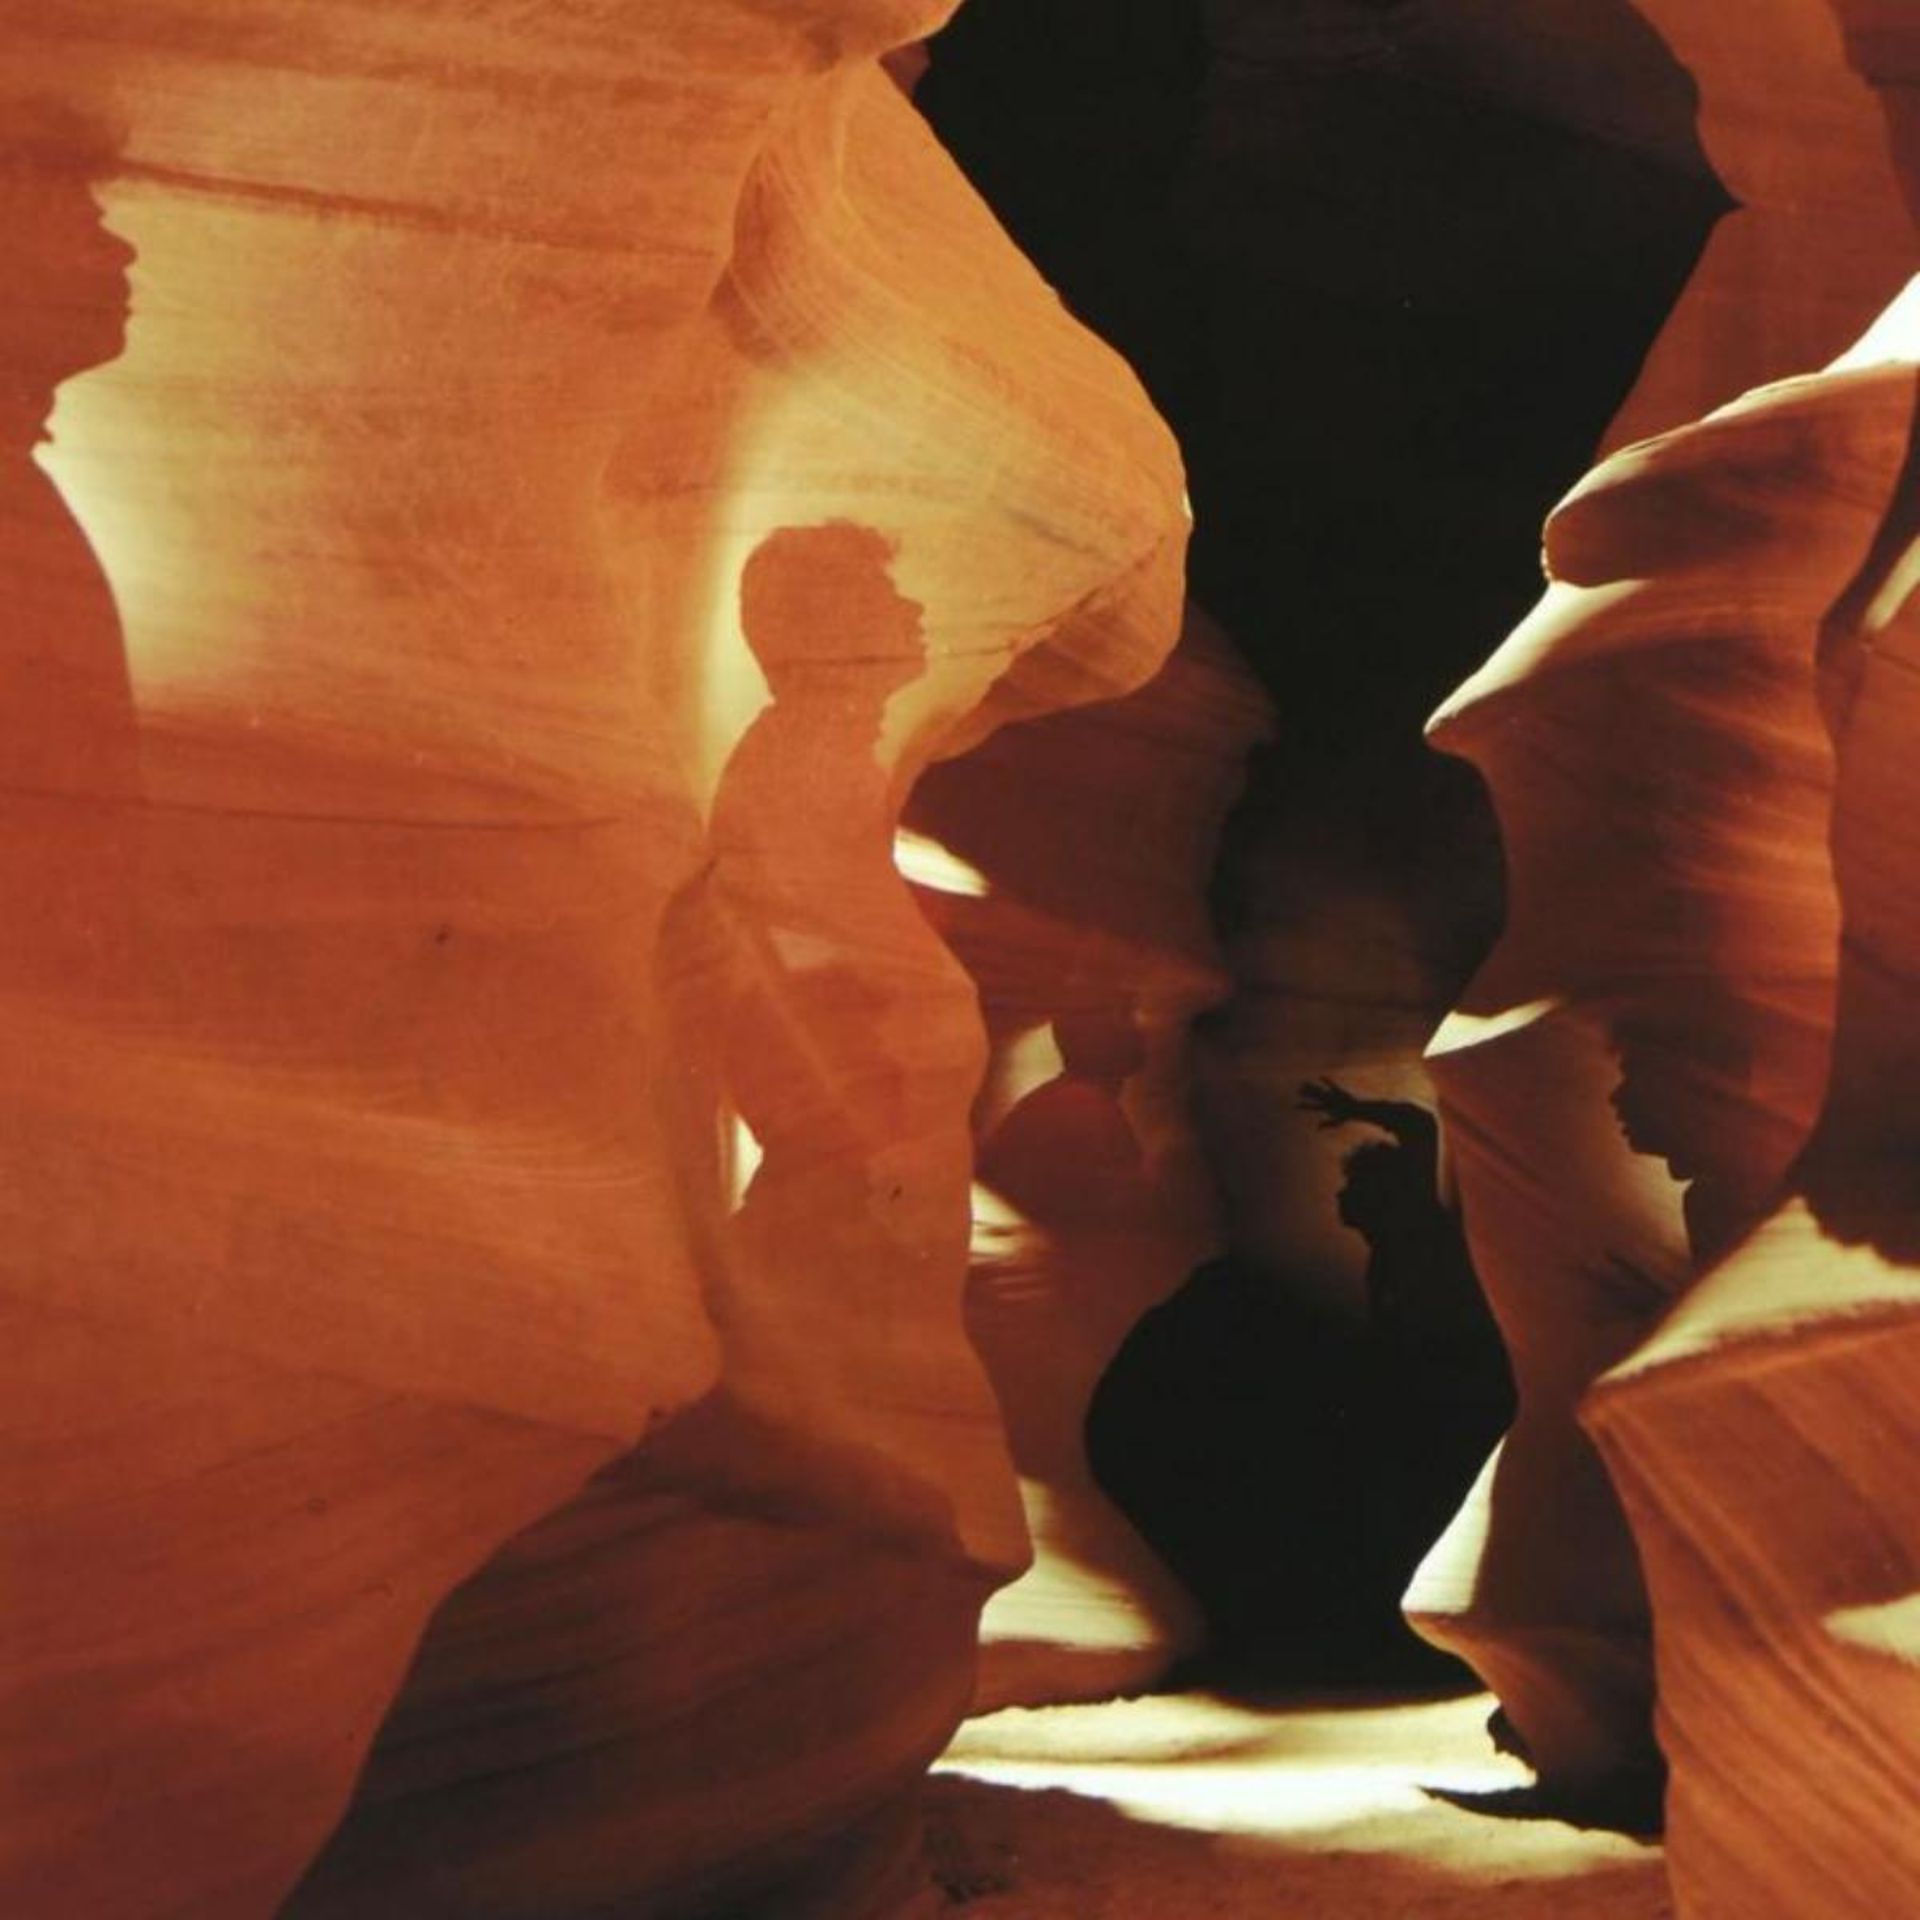 Robert Sheer, "Spirits in Corkscrew Canyon" Limited Edition Single Exposure Phot - Image 2 of 2